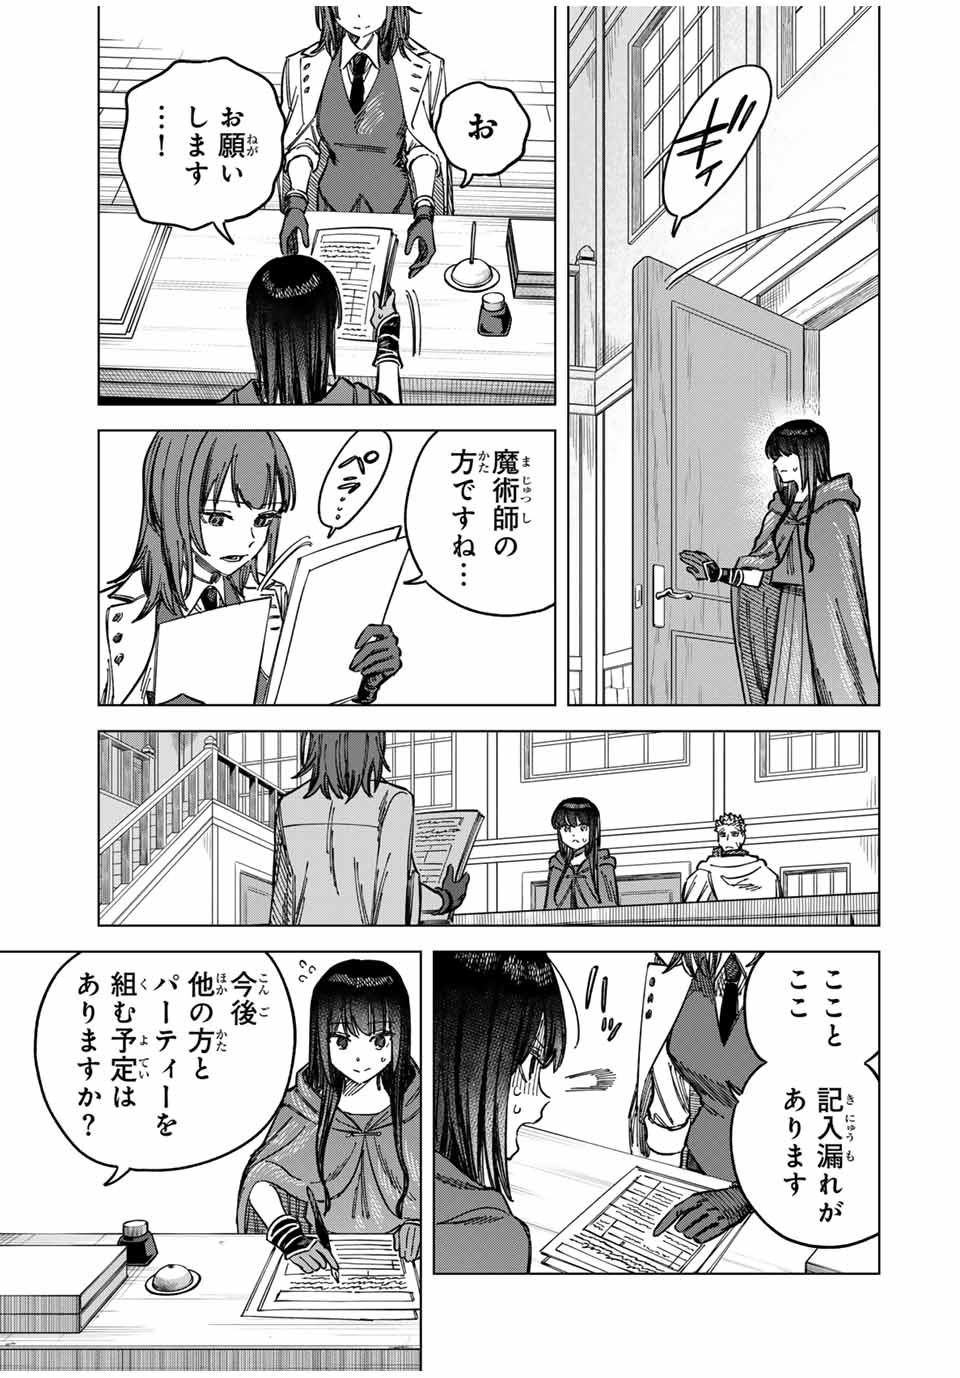 Witch and Mercenary 魔女と傭兵 第5.1話 - Page 7